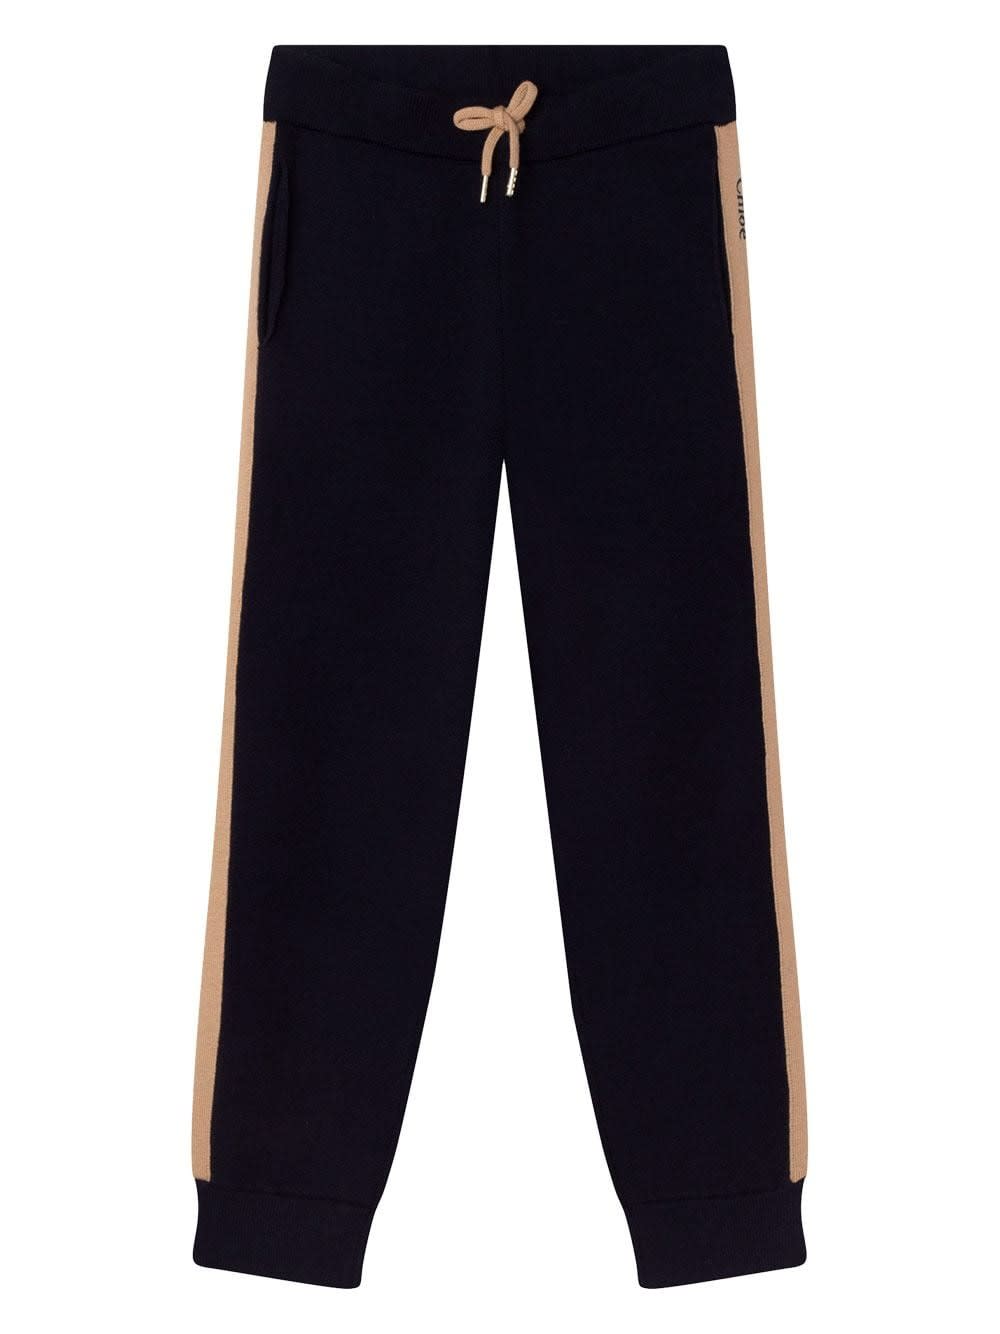 CHLOÉ KIDS NAVY BLUE JOGGERS WITH CONTRAST STRIPES